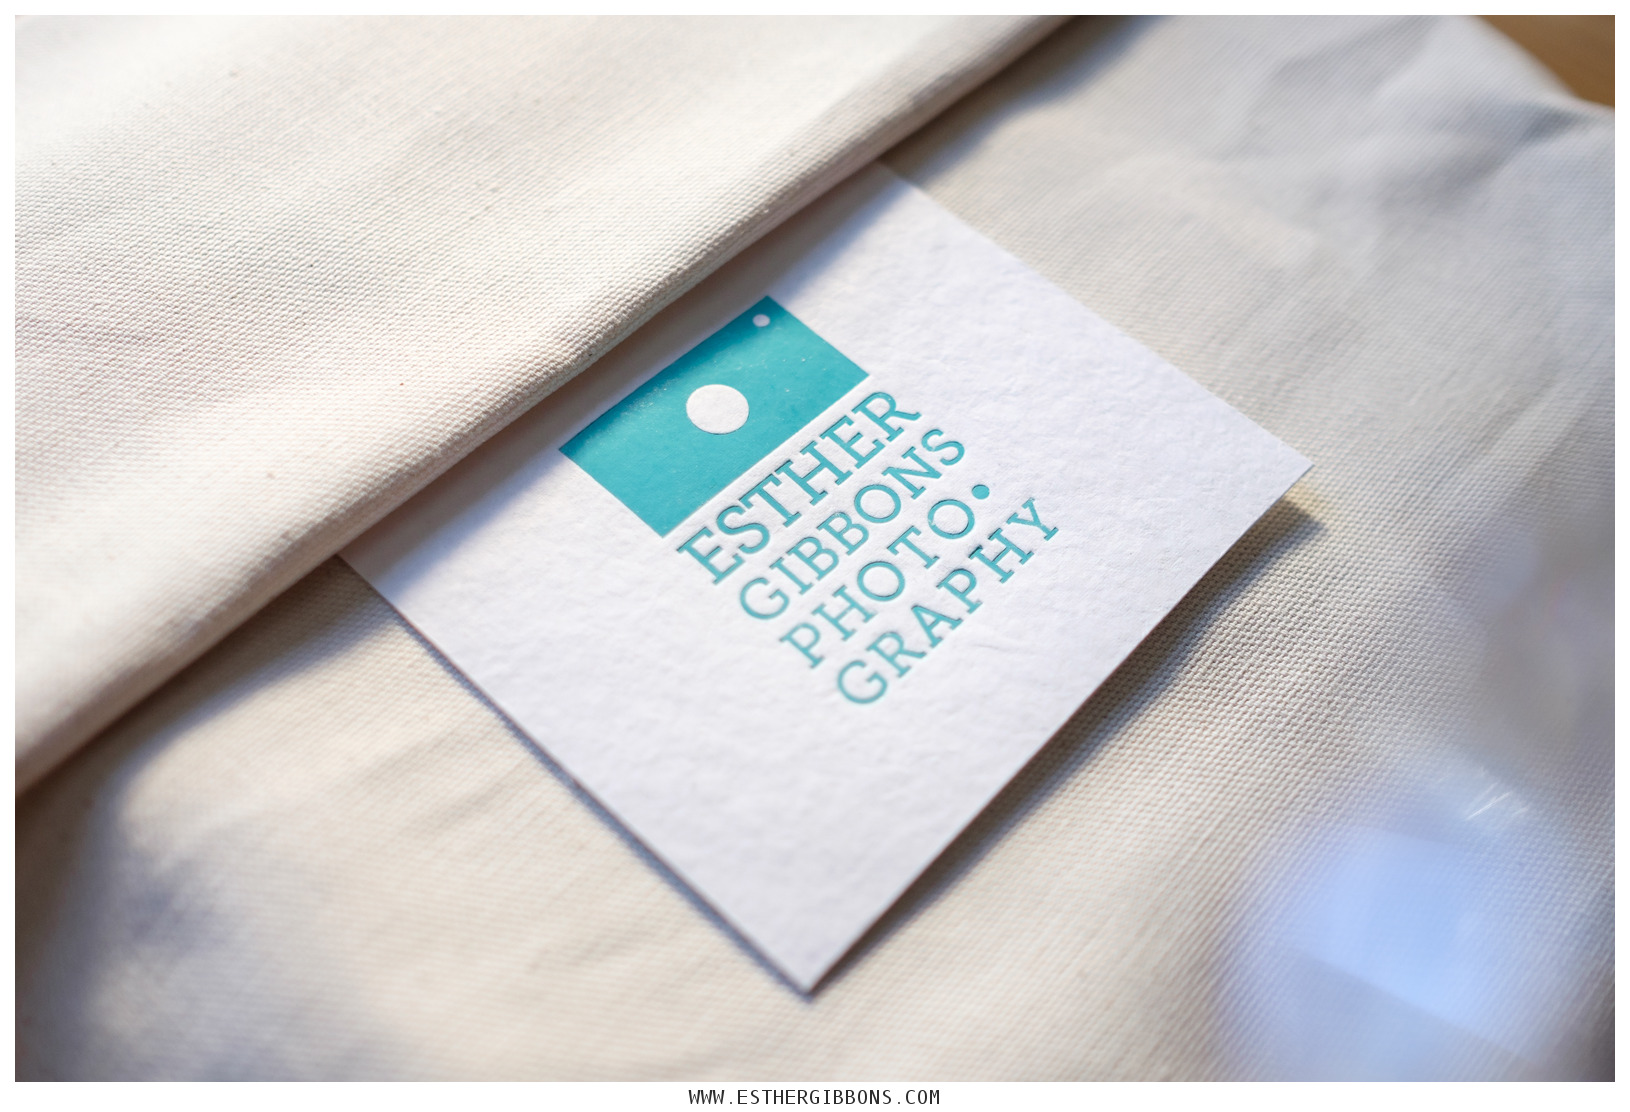 Close up of Esther Gibbons Photography logo on album